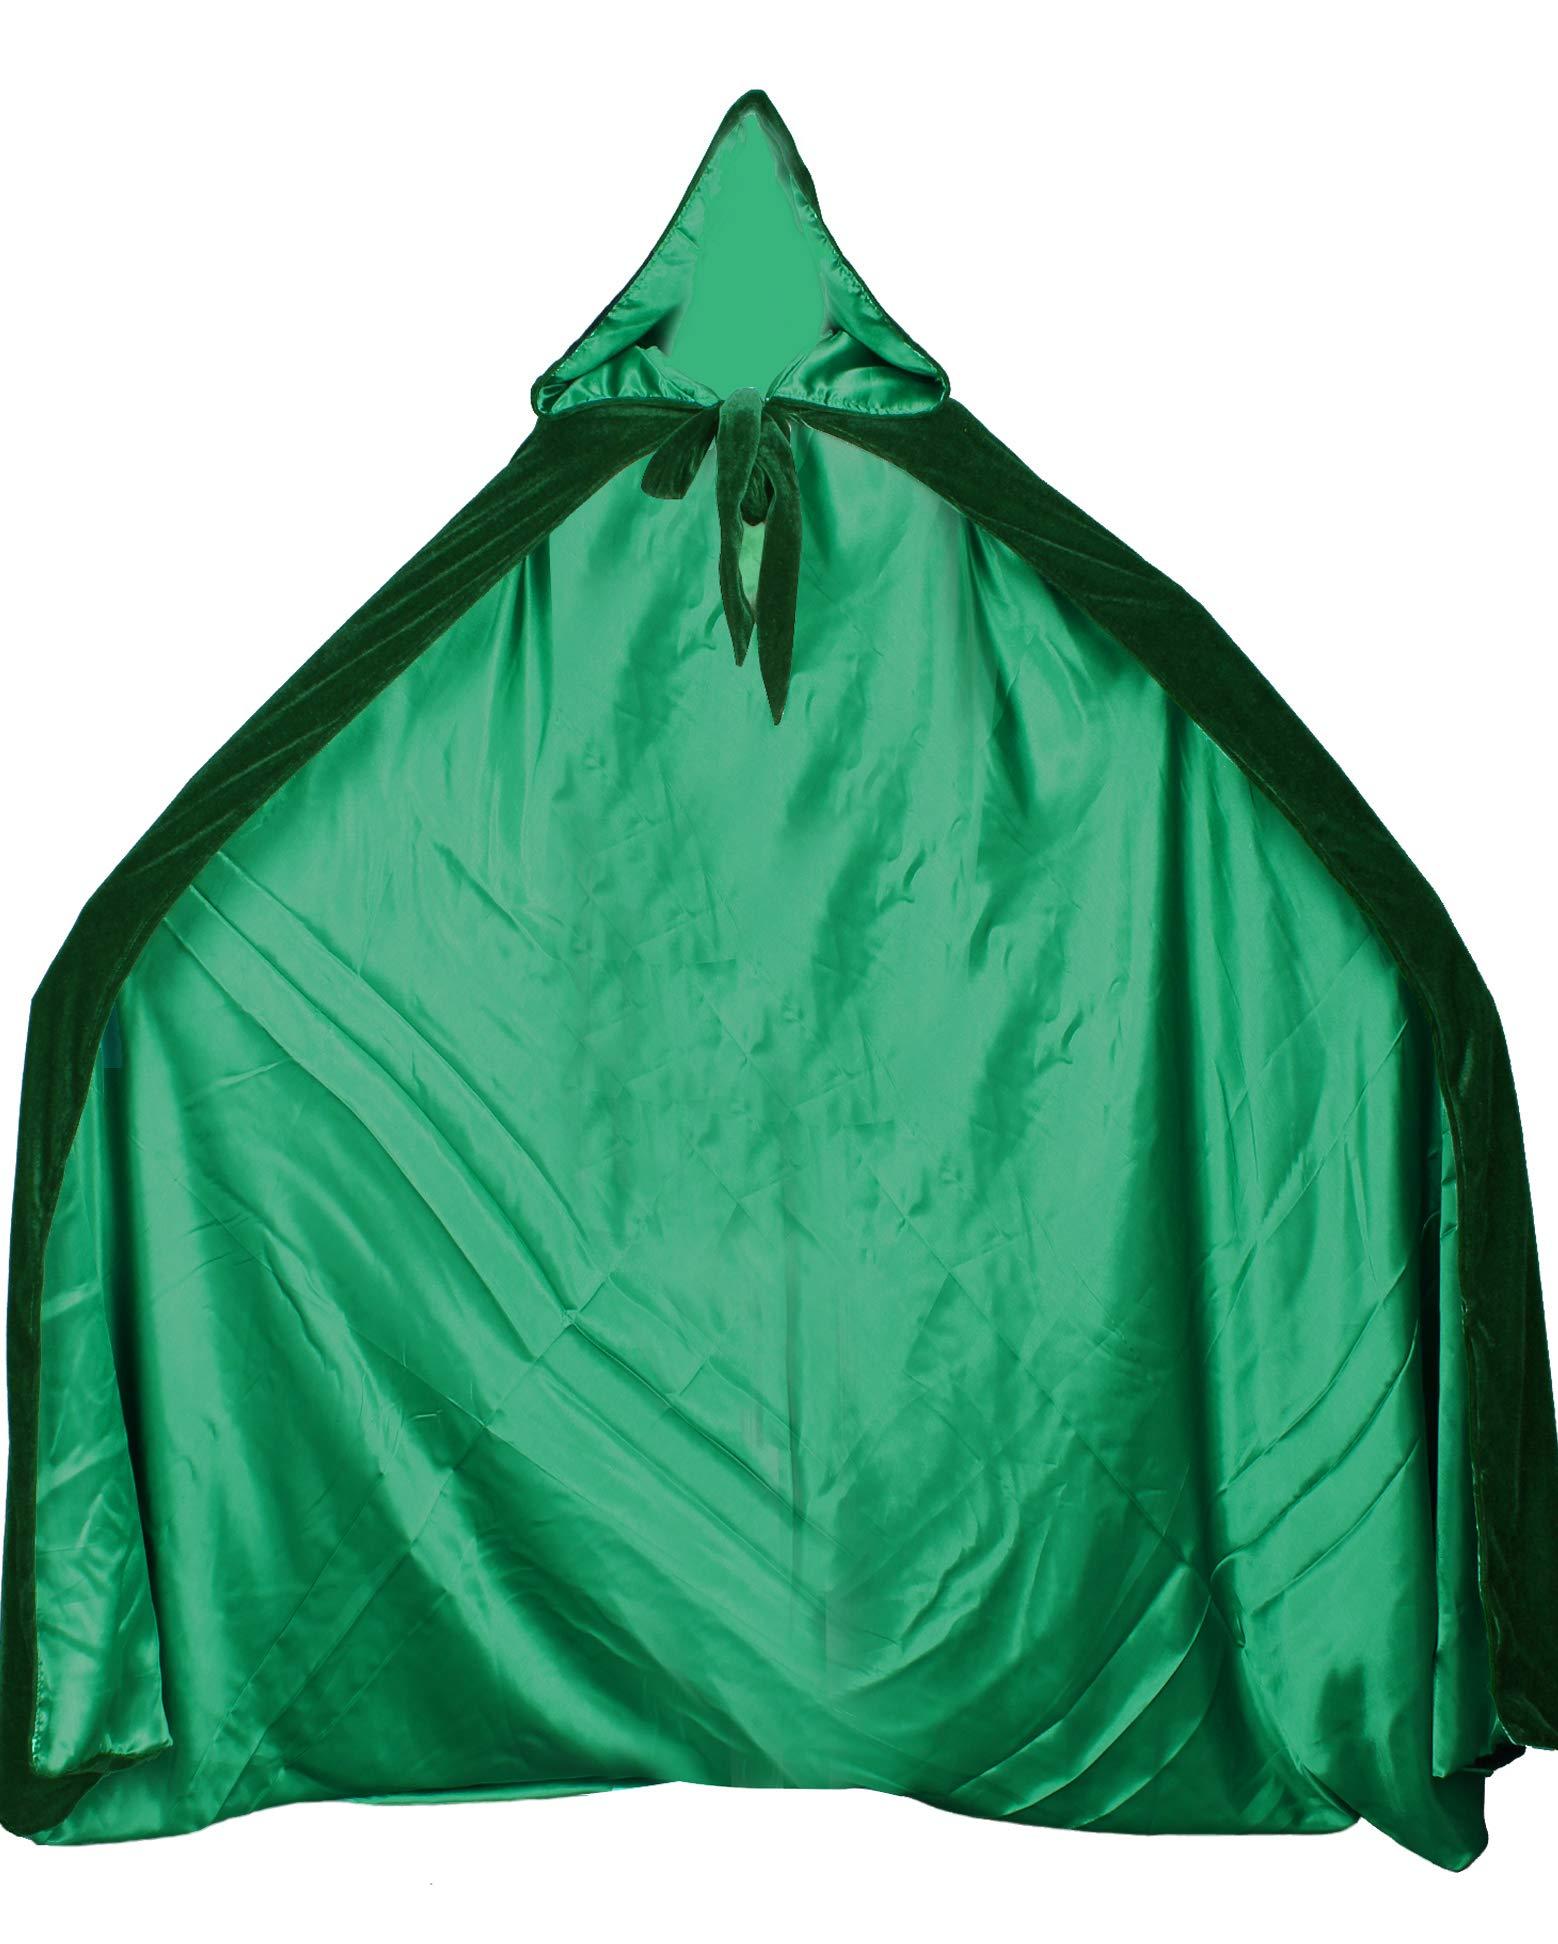 LuckyMjmy Velvet Medieval Wedding Cape Cloak Lined with Satin lining (Large, Dark green) 0